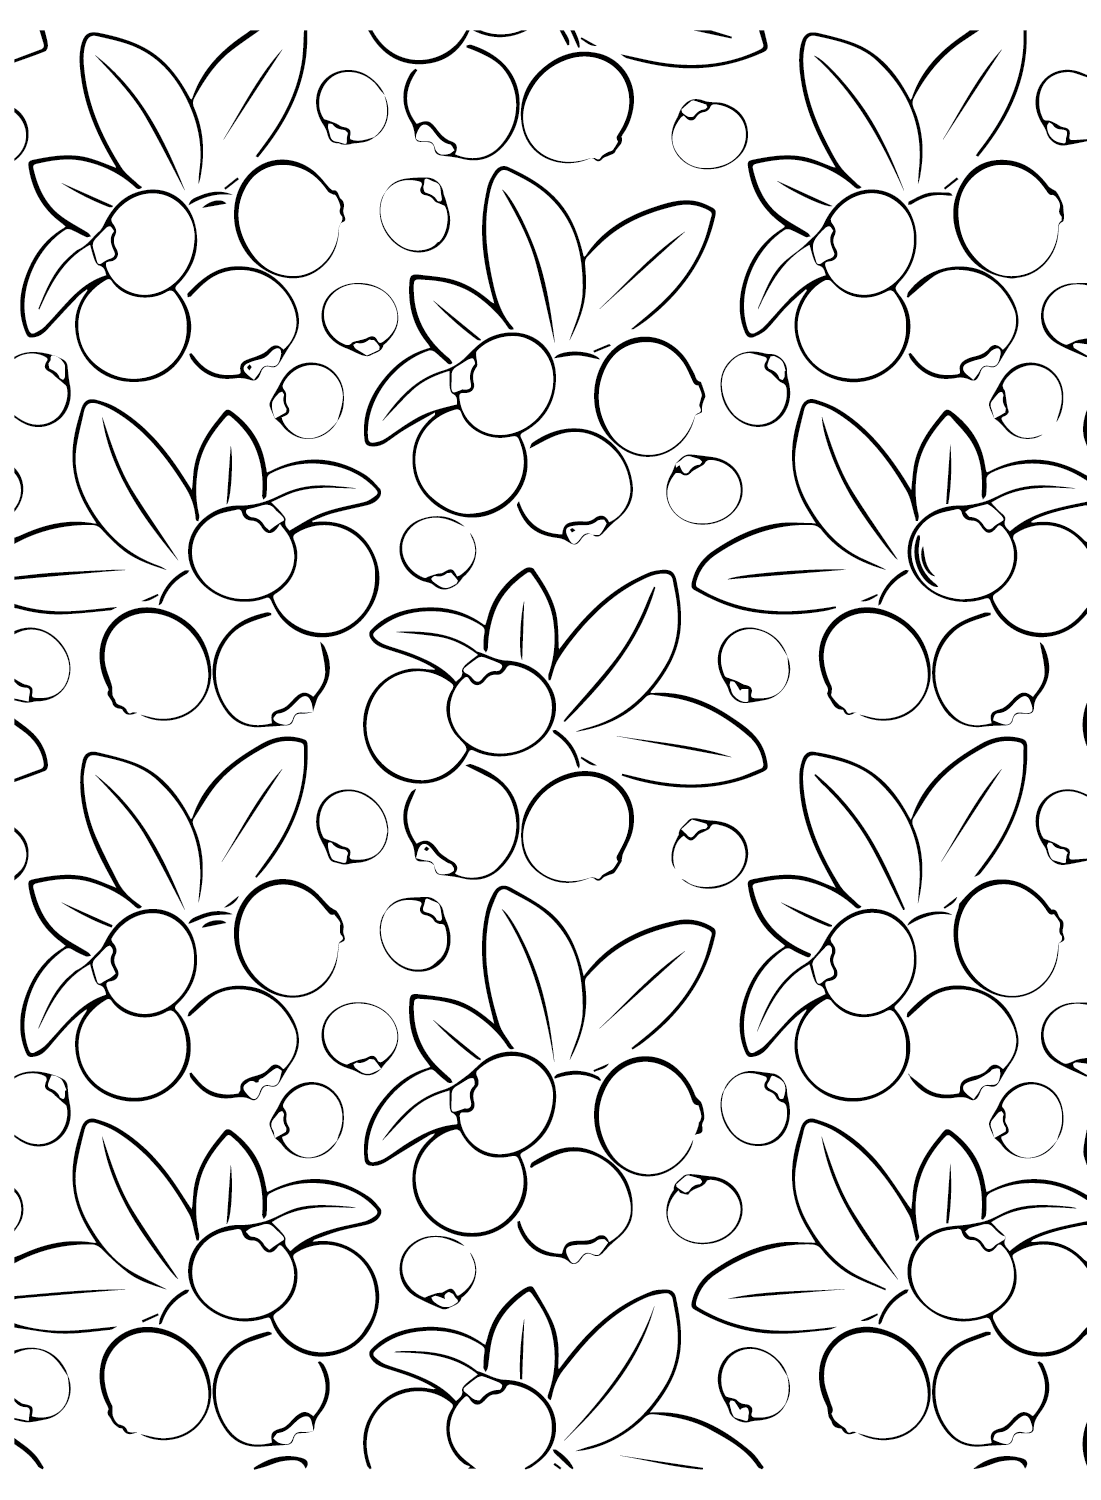 Background Cranberry Coloring Page